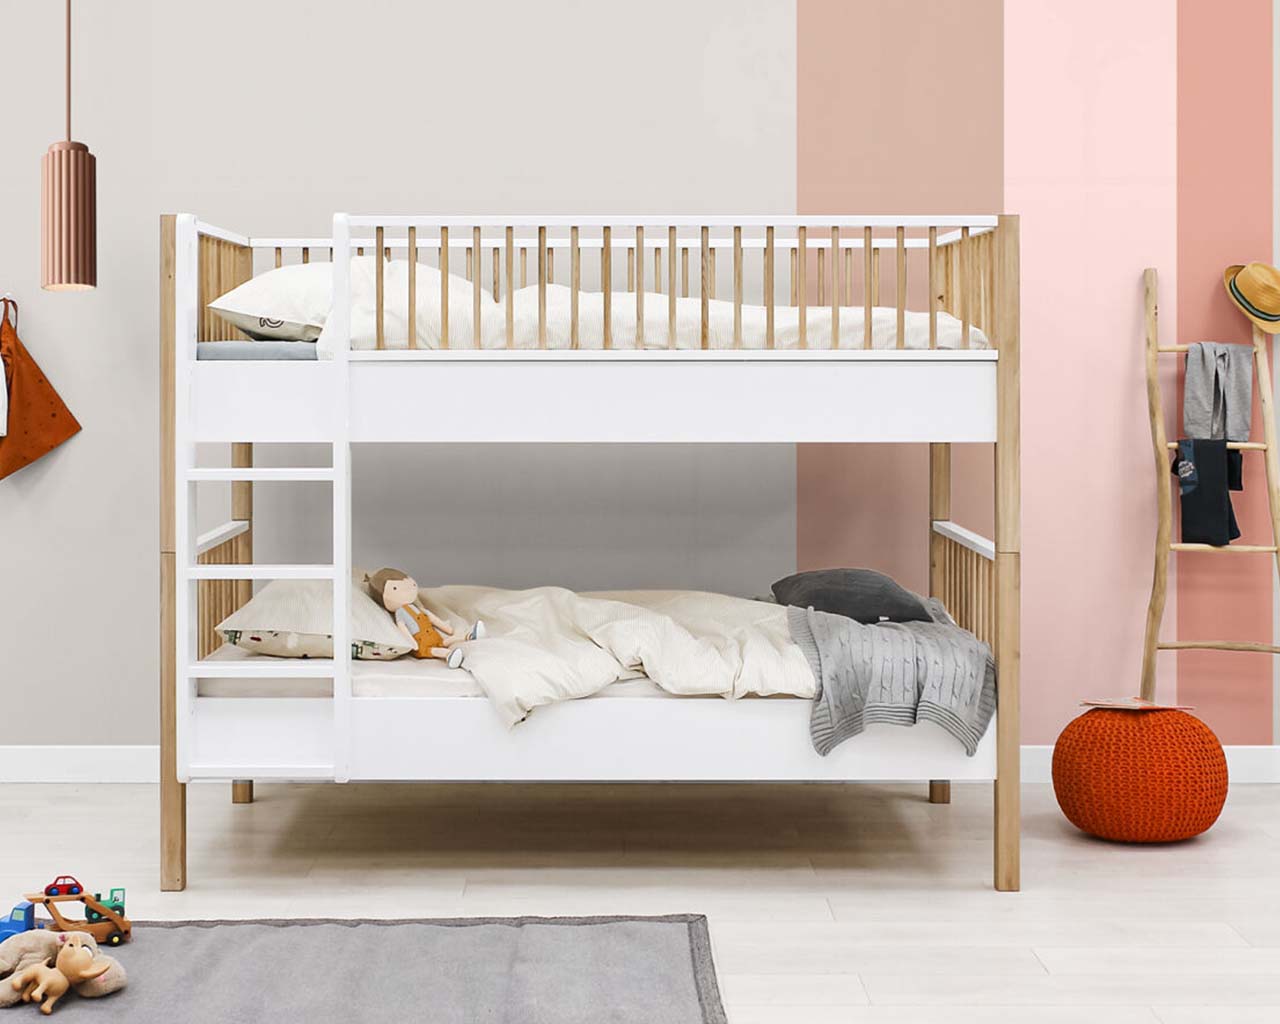 Nori bunk bed with storage trundle